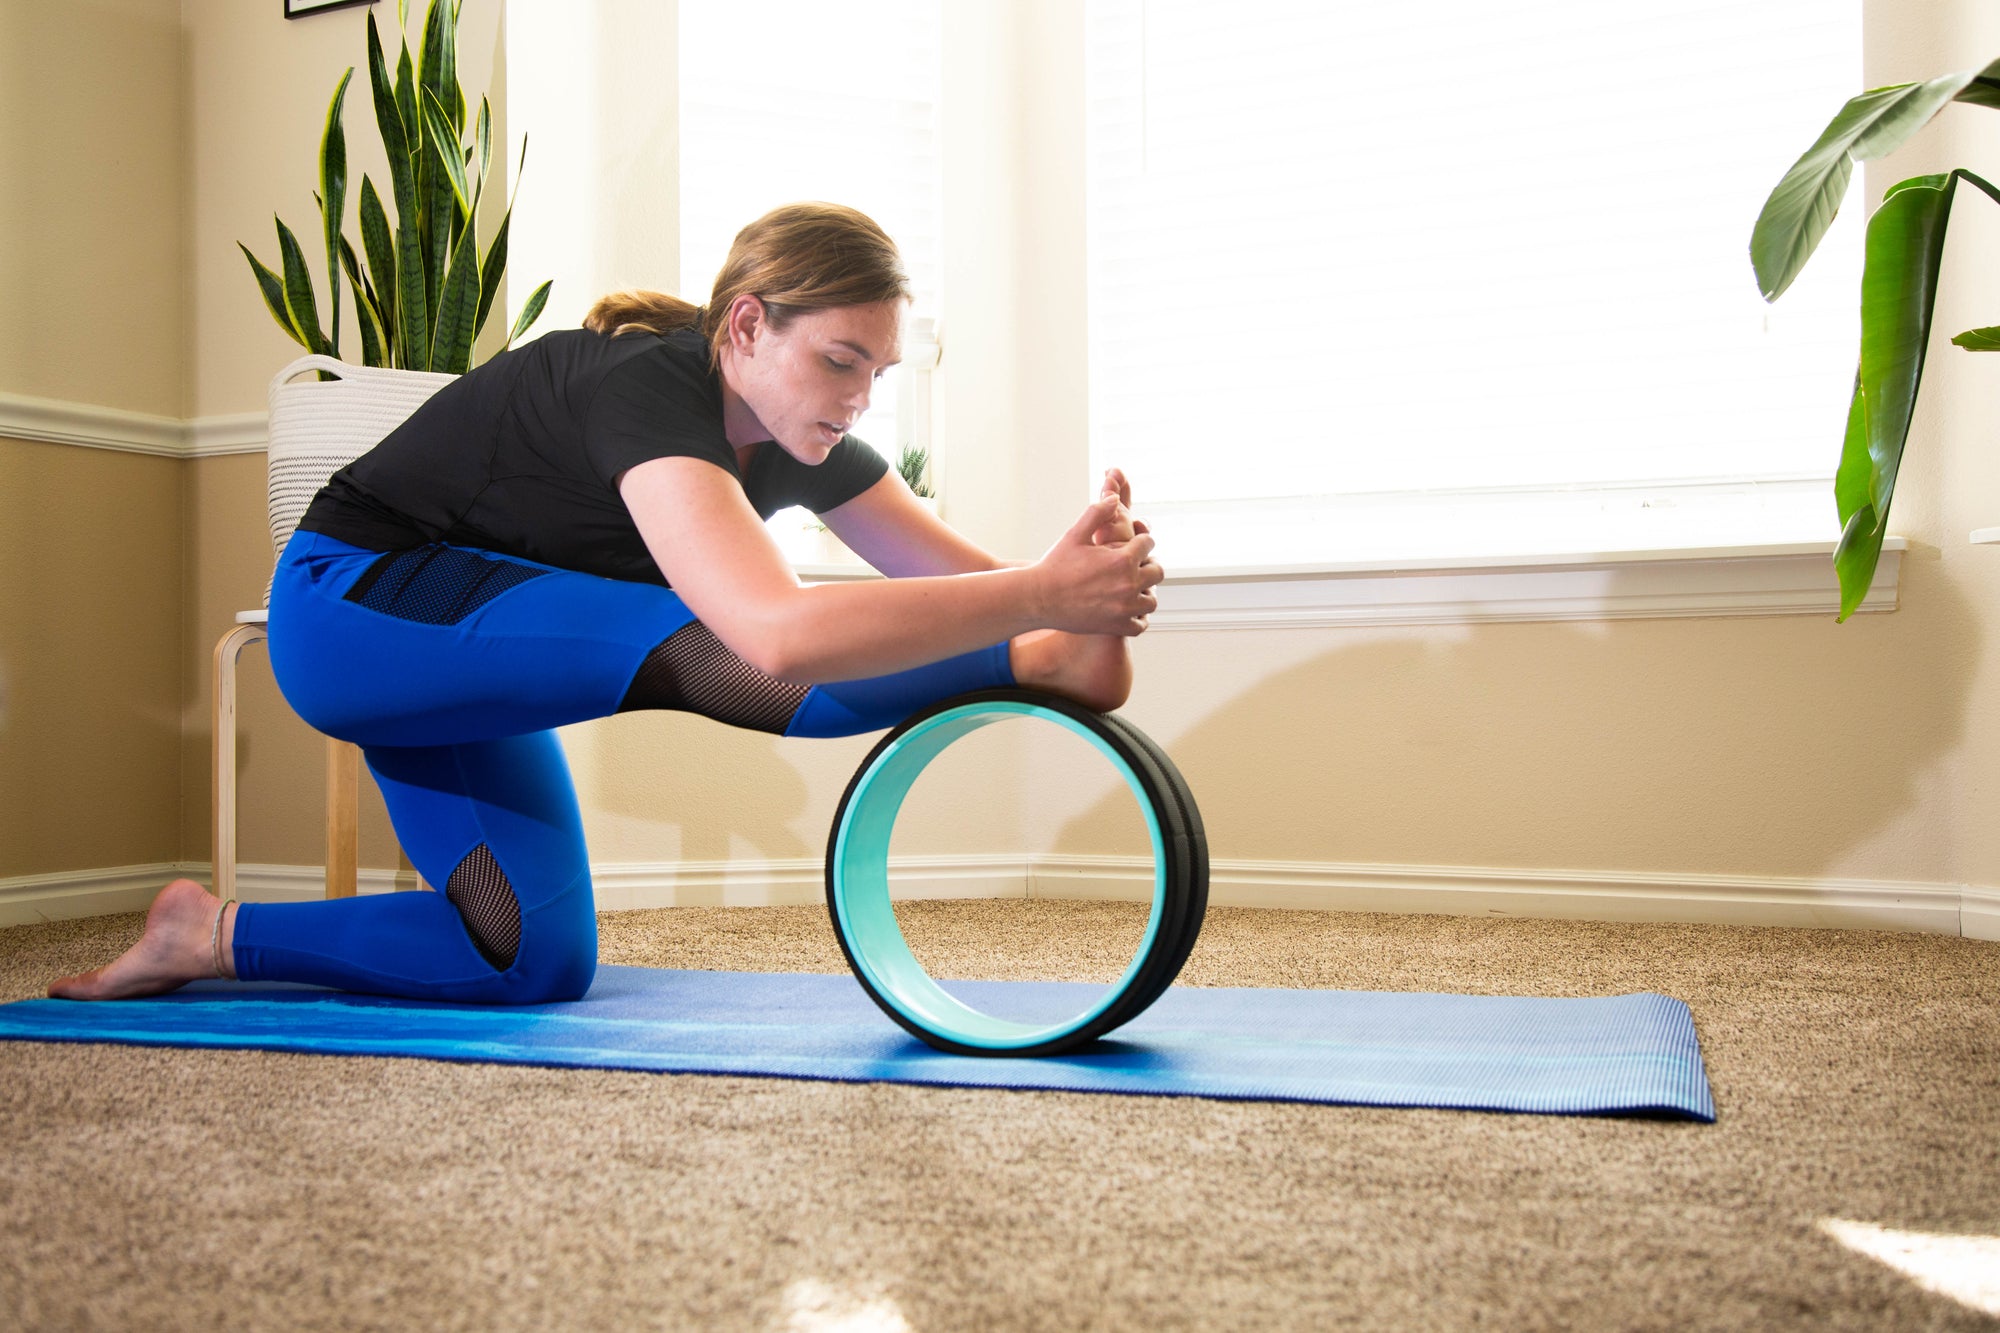 How to Use the Chirp Wheel to Increase Flexibility